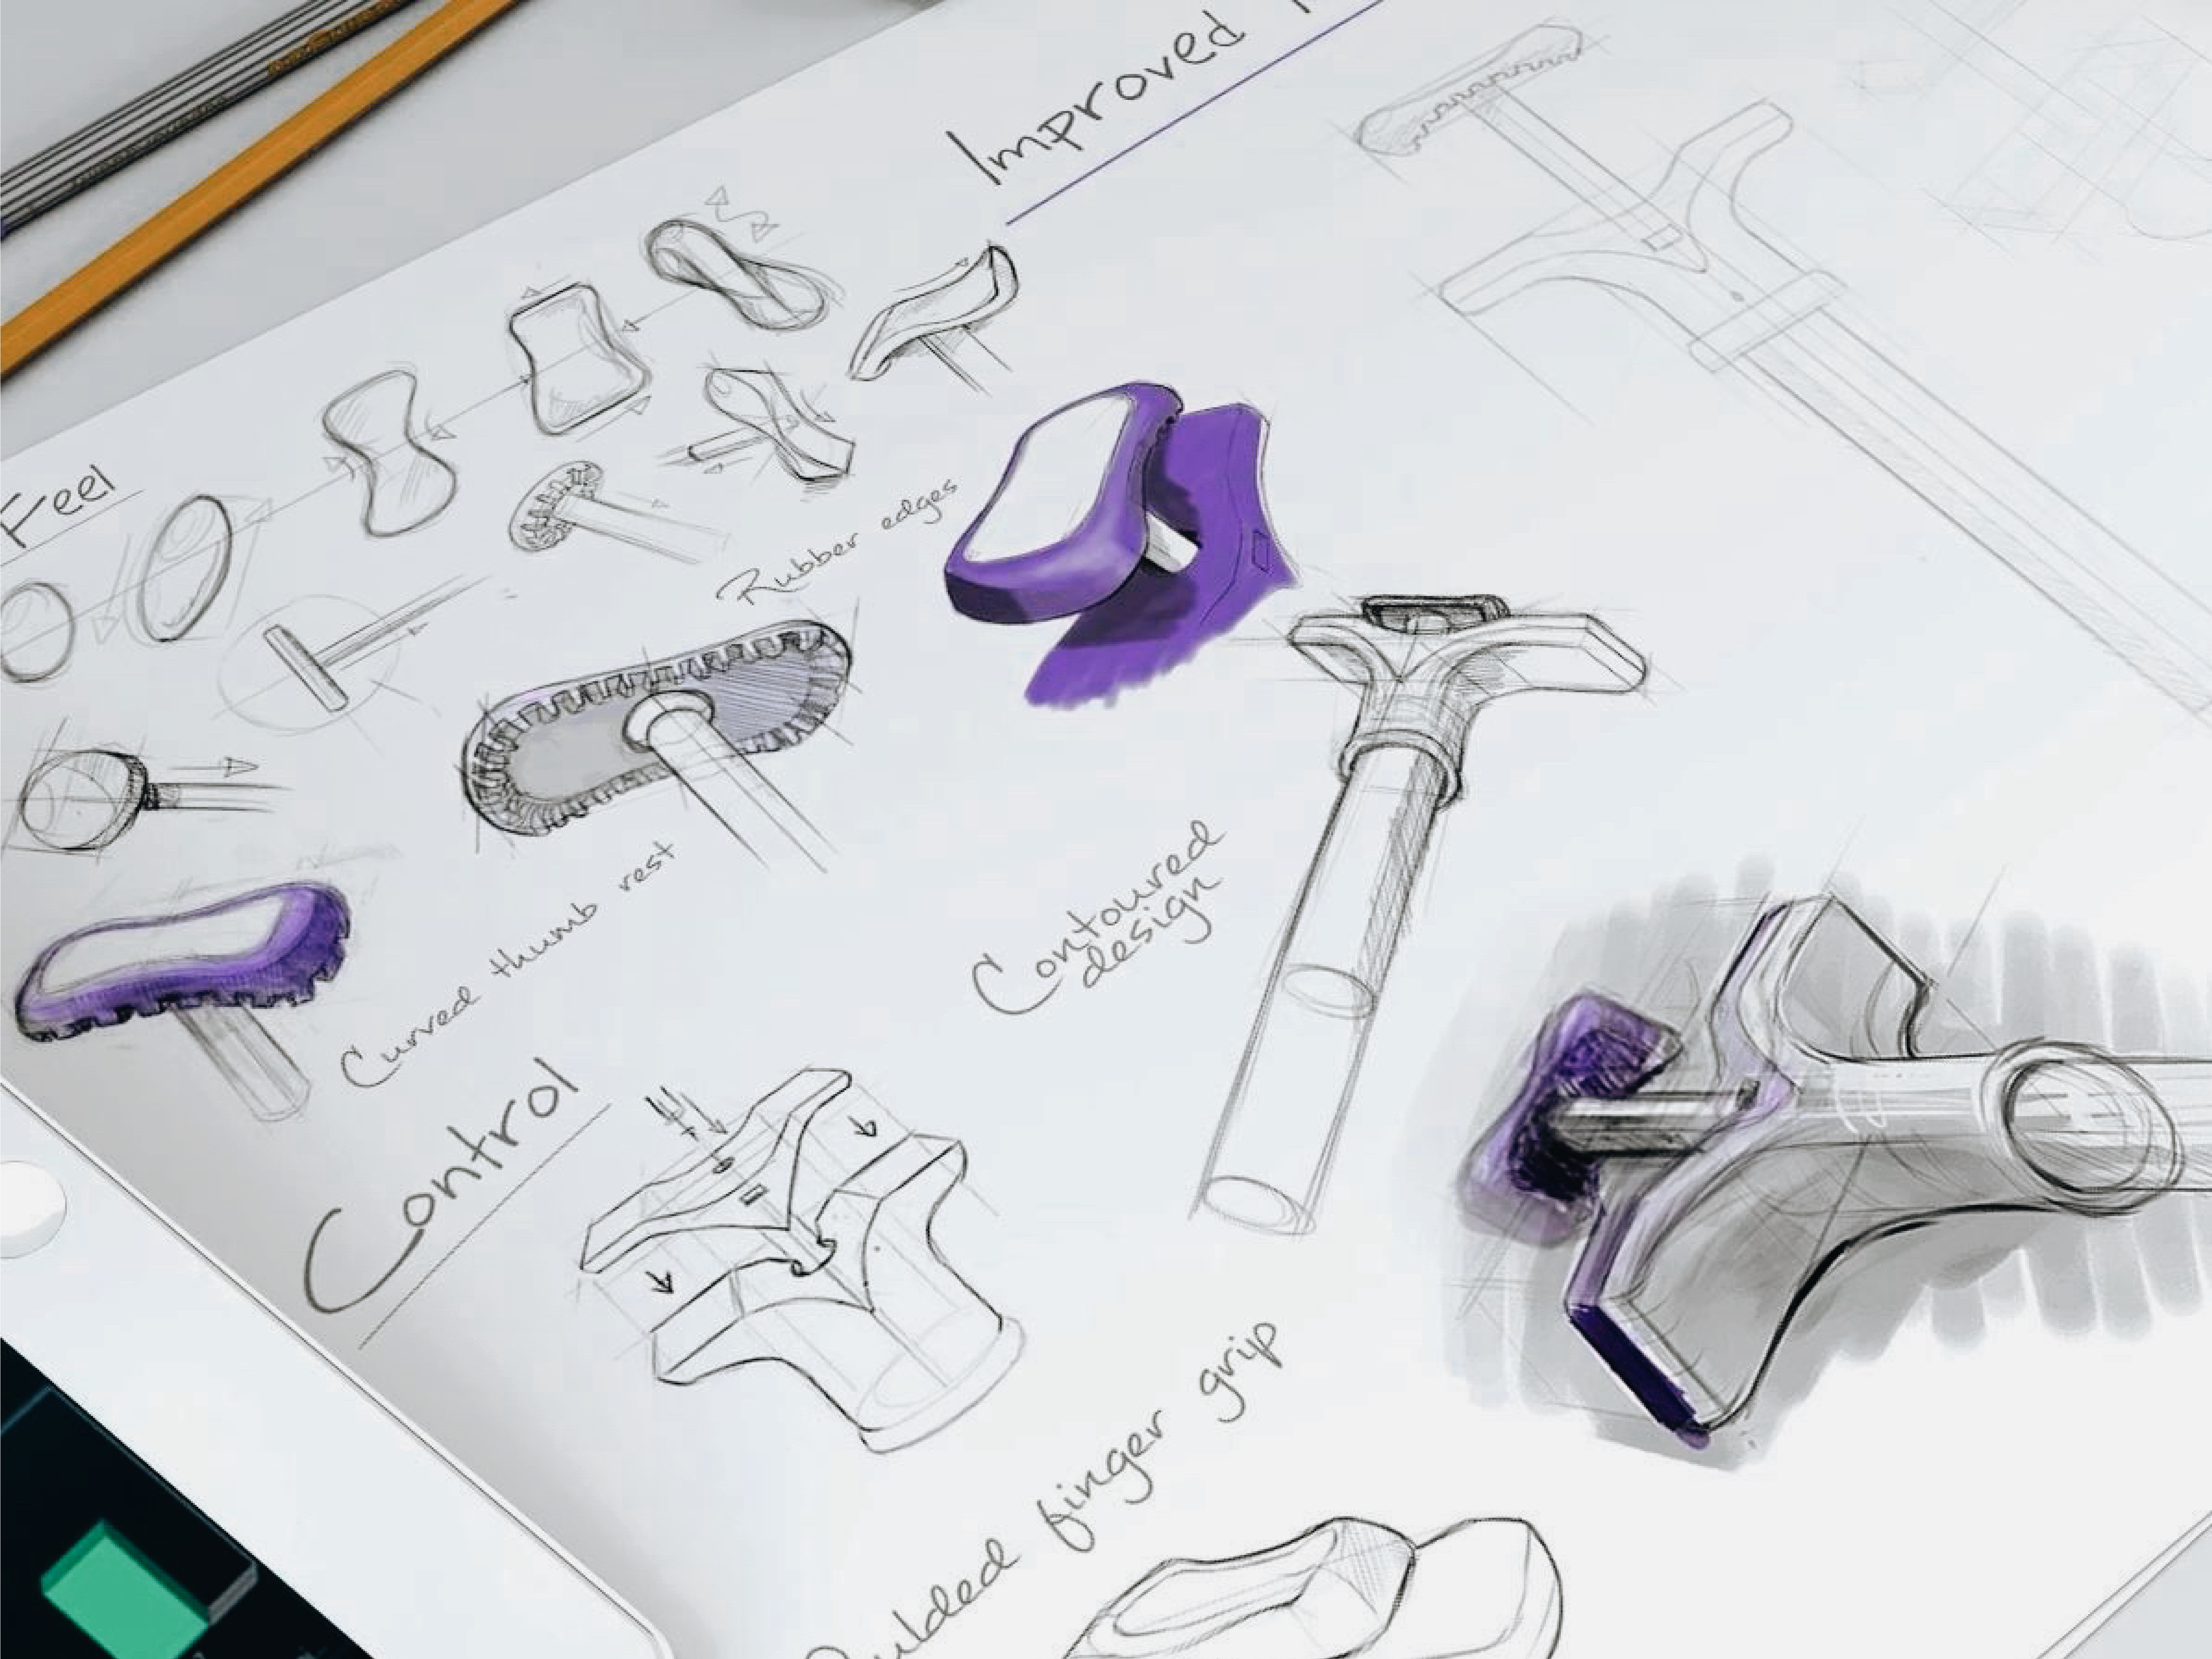 Sketches used during product development